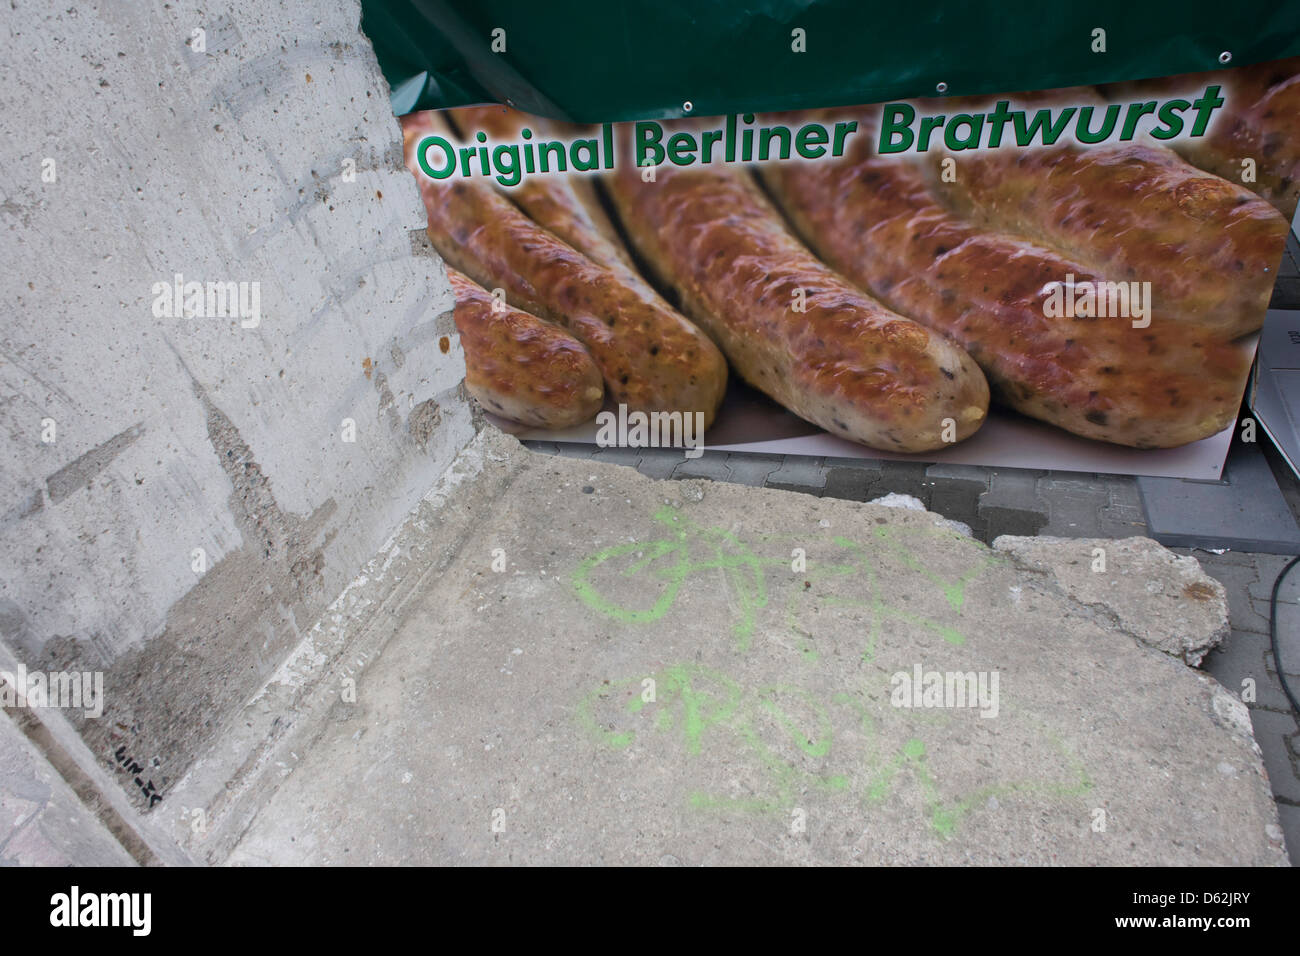 A poster for original Berliner Bratwurst sausage next to a section of the Berlin wall near the former Checkpoint Charlie, the former border between Communist East and West Berlin during the Cold War. The Berlin Wall was a barrier constructed by the German Democratic Republic (GDR, East Germany) starting on 13 August 1961, that completely cut off (by land) West Berlin from surrounding East Germany and from East Berlin.  .. (More in Description). Stock Photo